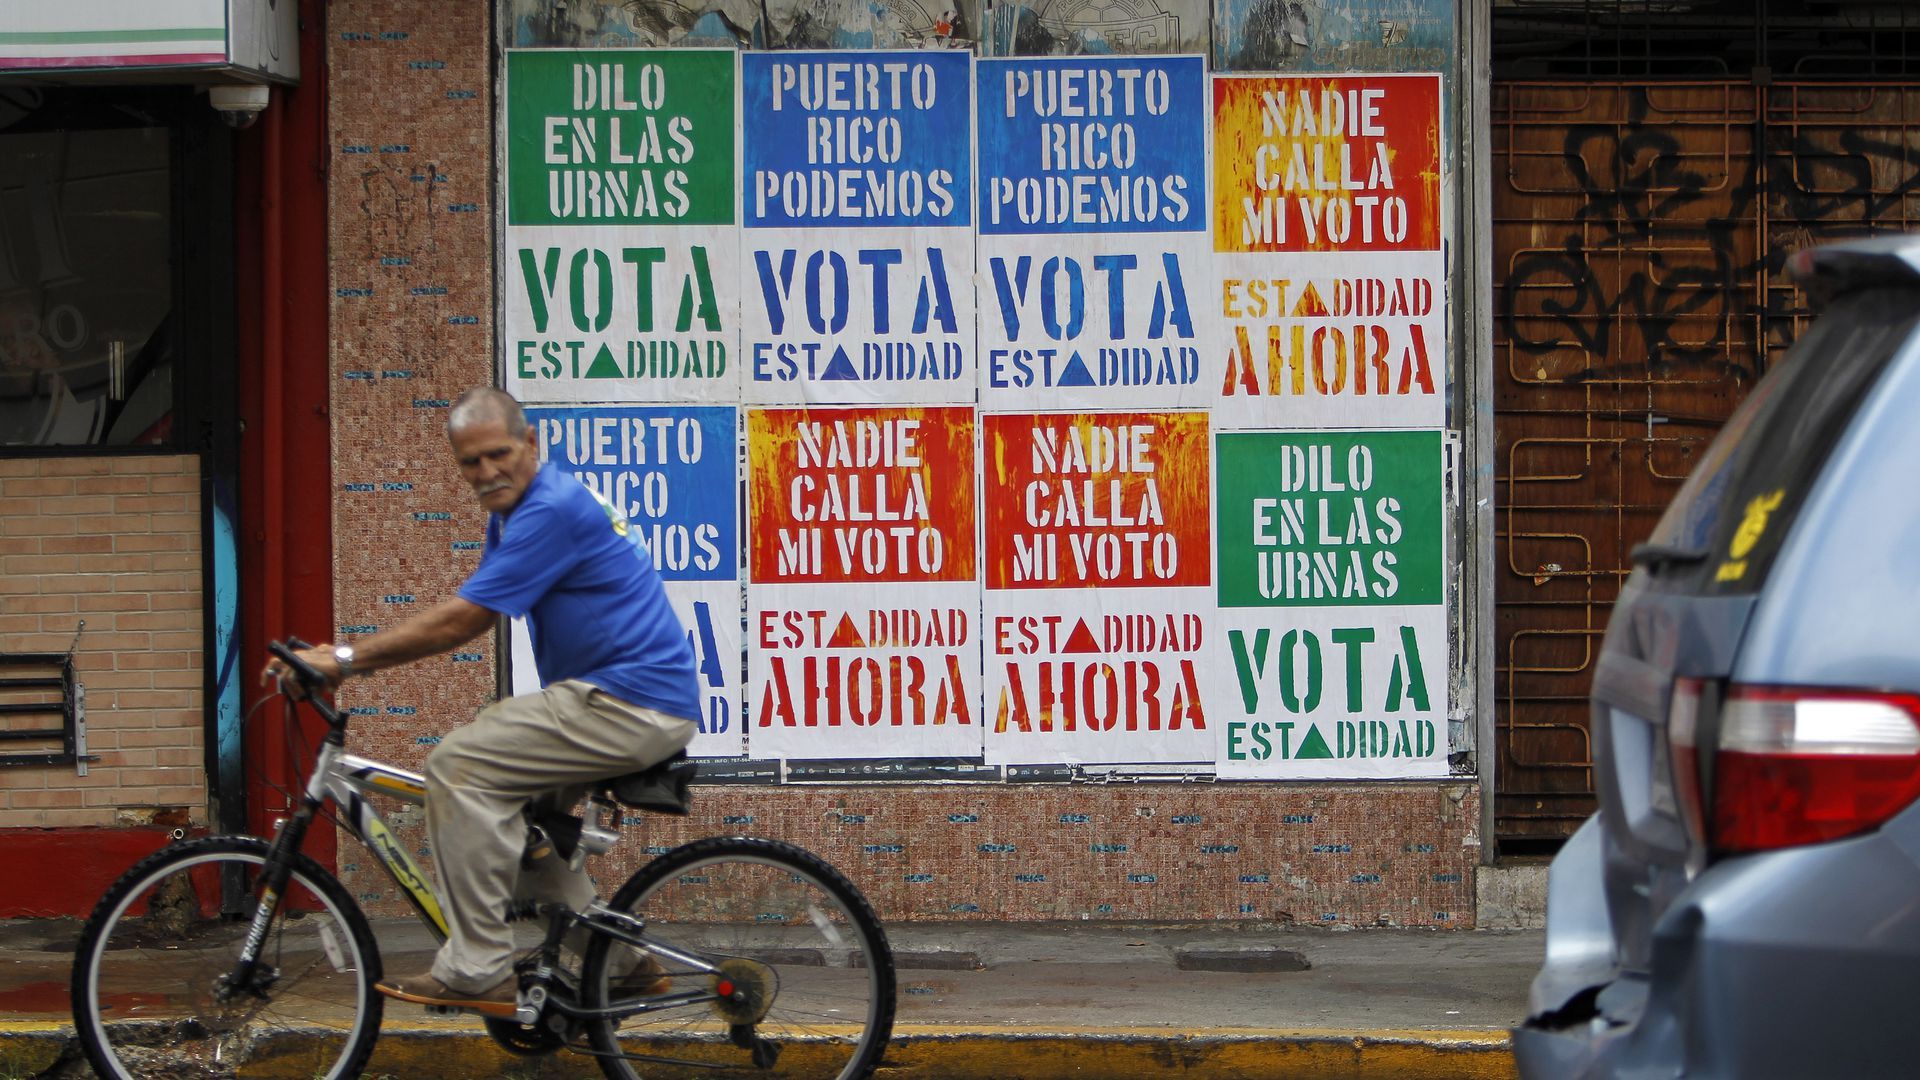 A man rides past signs calling for a vote on Puerto Rican statehood. Photo: Ricardo Arduengo/AFP via Getty Images.